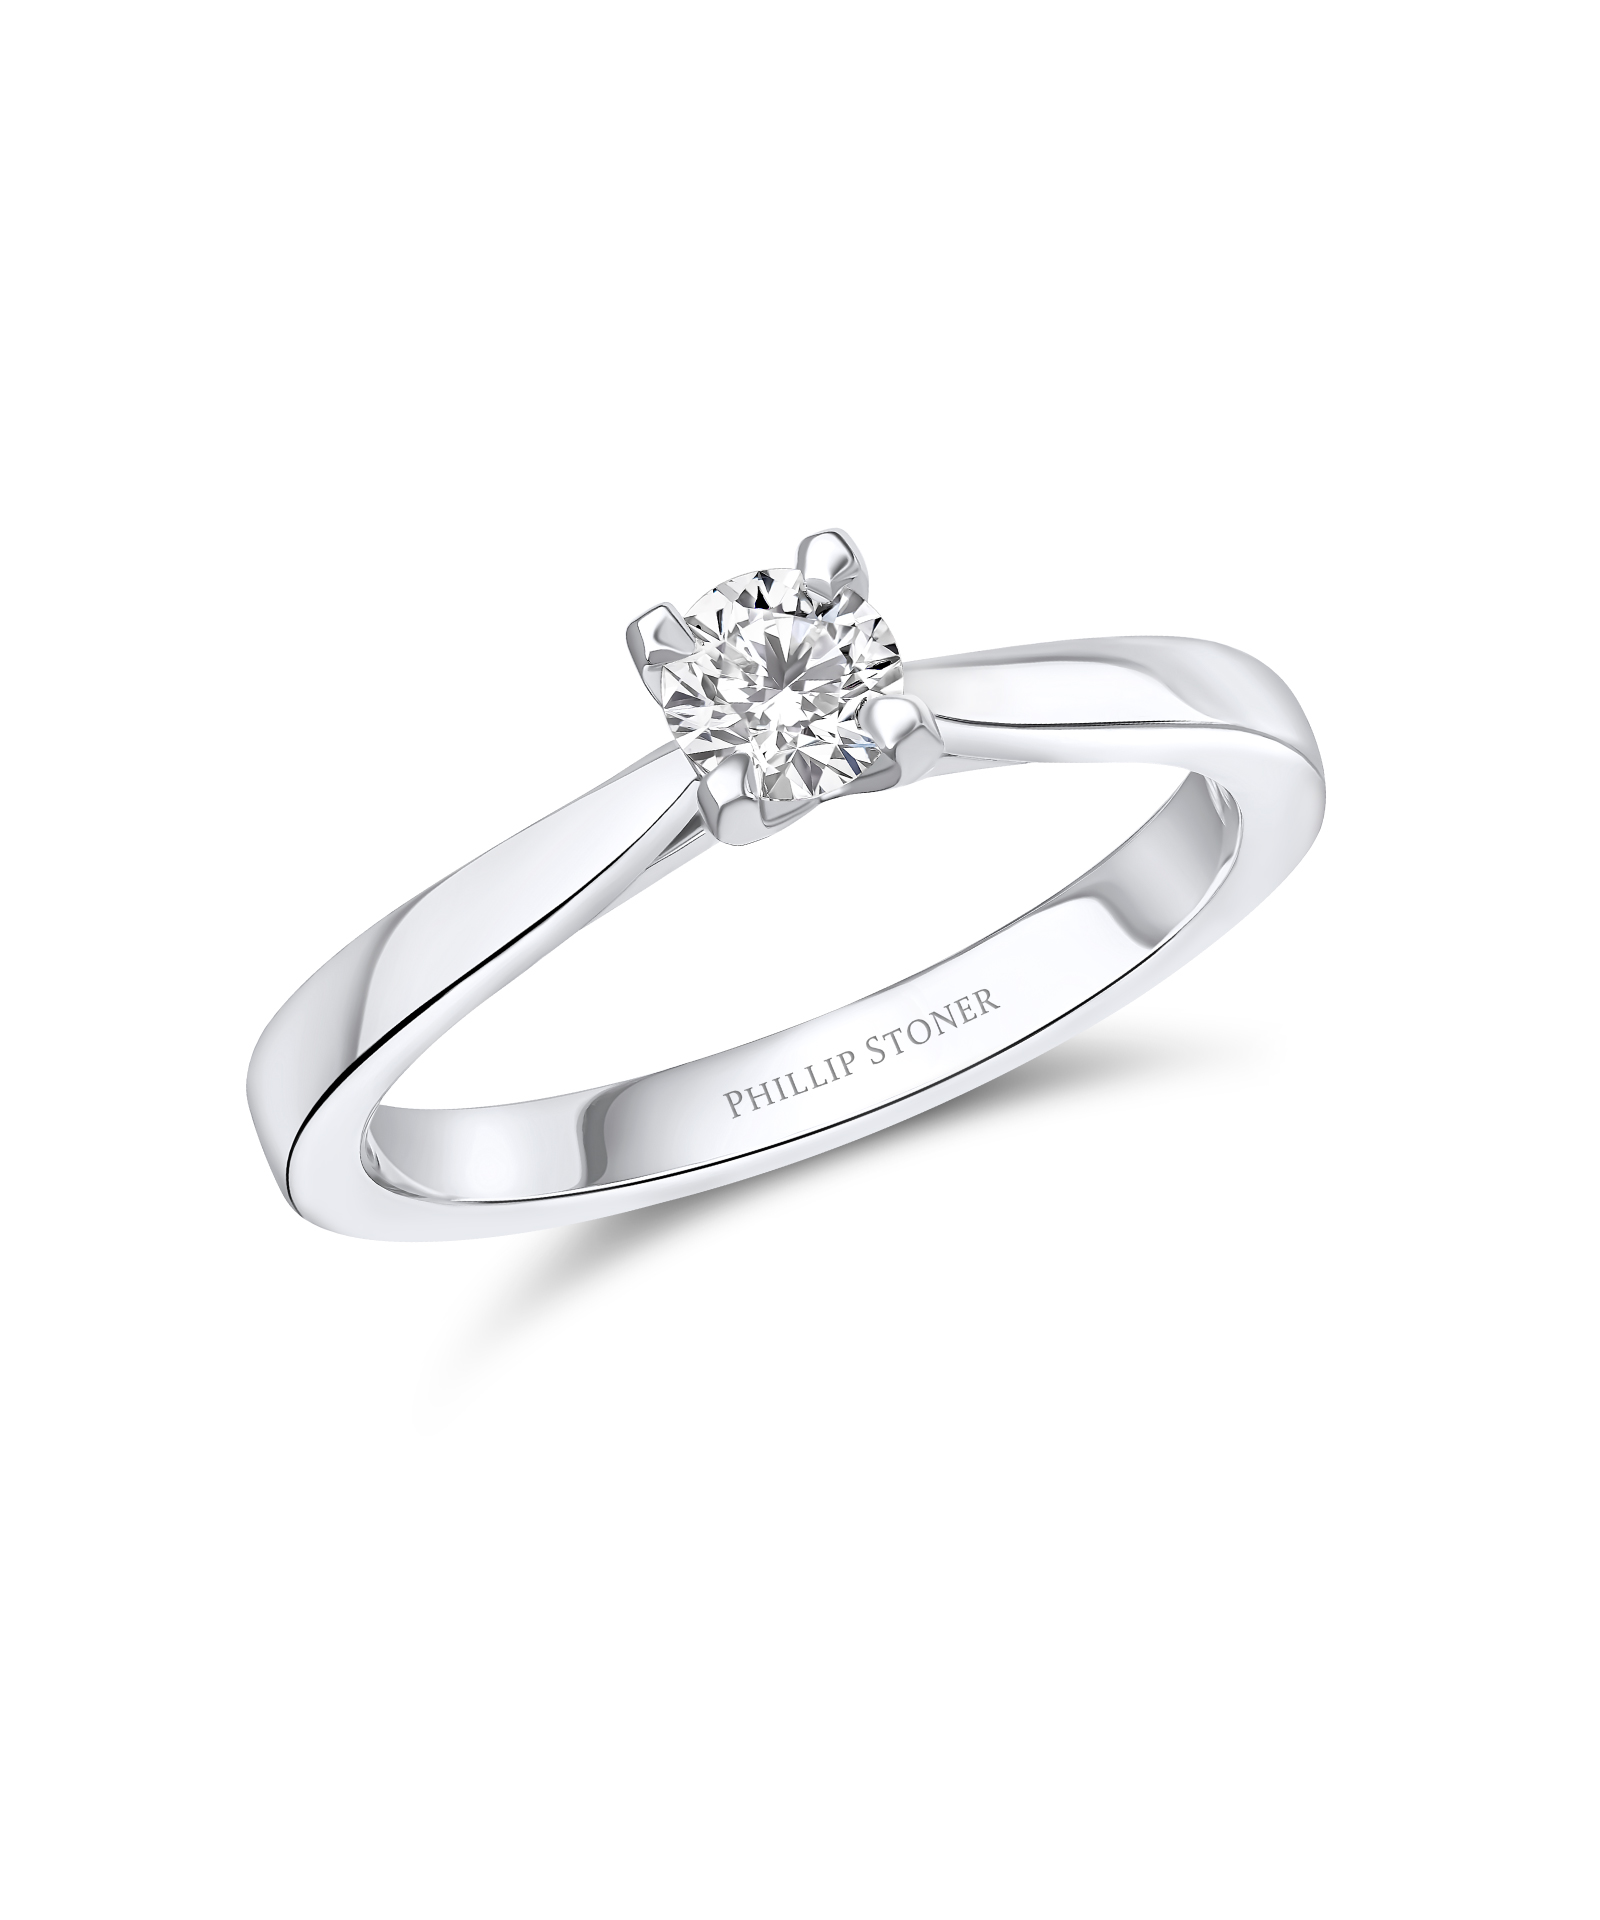 0.30ct Round Brilliant Cut Diamond Ring with Cathedral Setting - Phillip Stoner The Jeweller